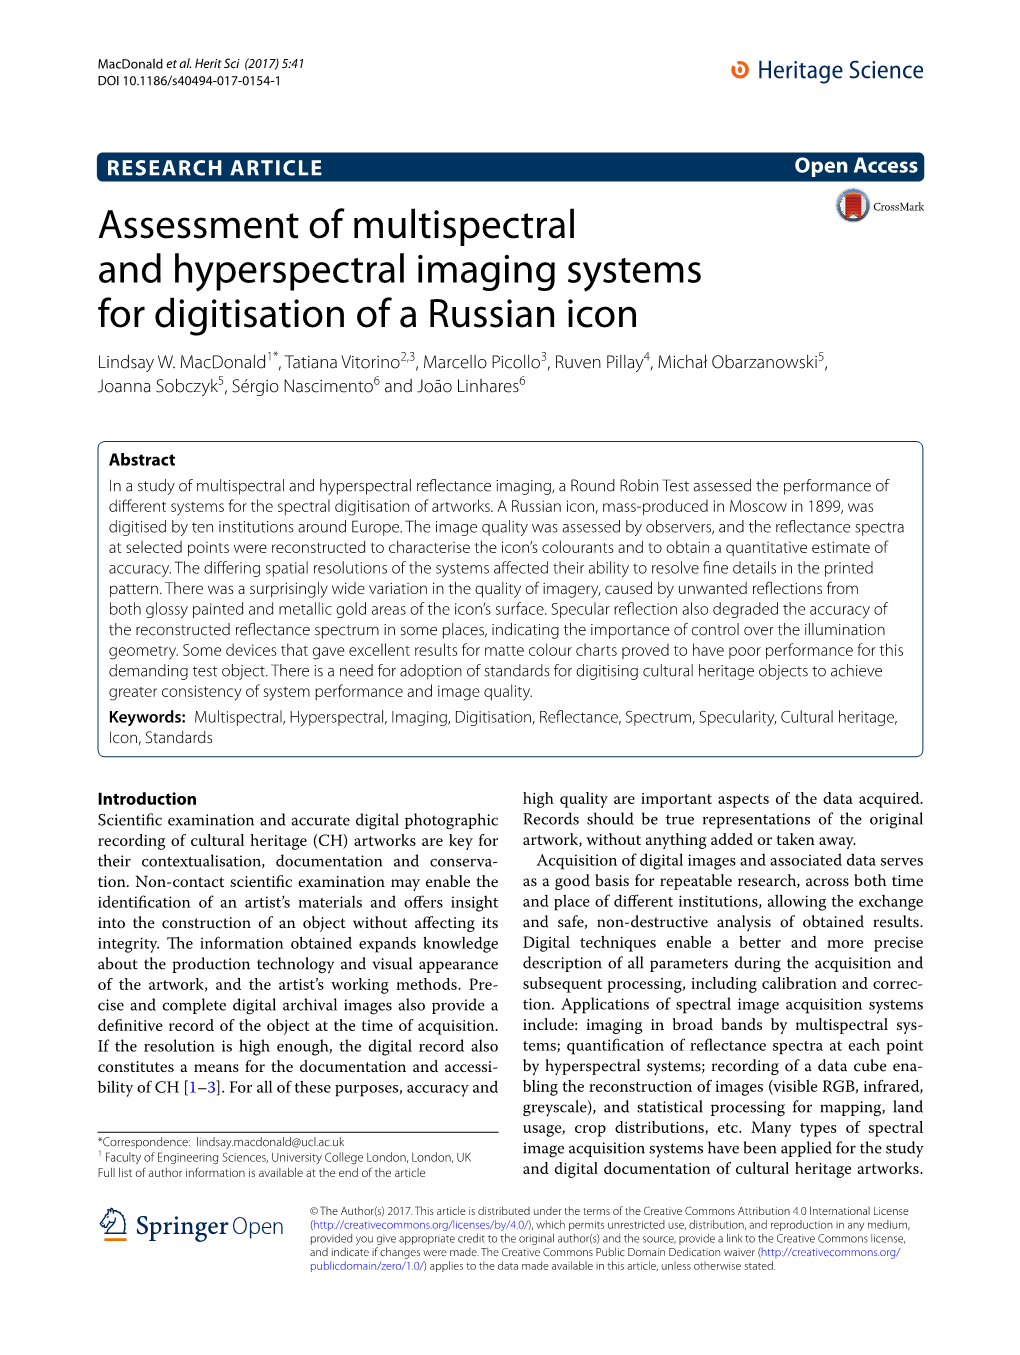 Assessment of Multispectral and Hyperspectral Imaging Systems for Digitisation of a Russian Icon Lindsay W